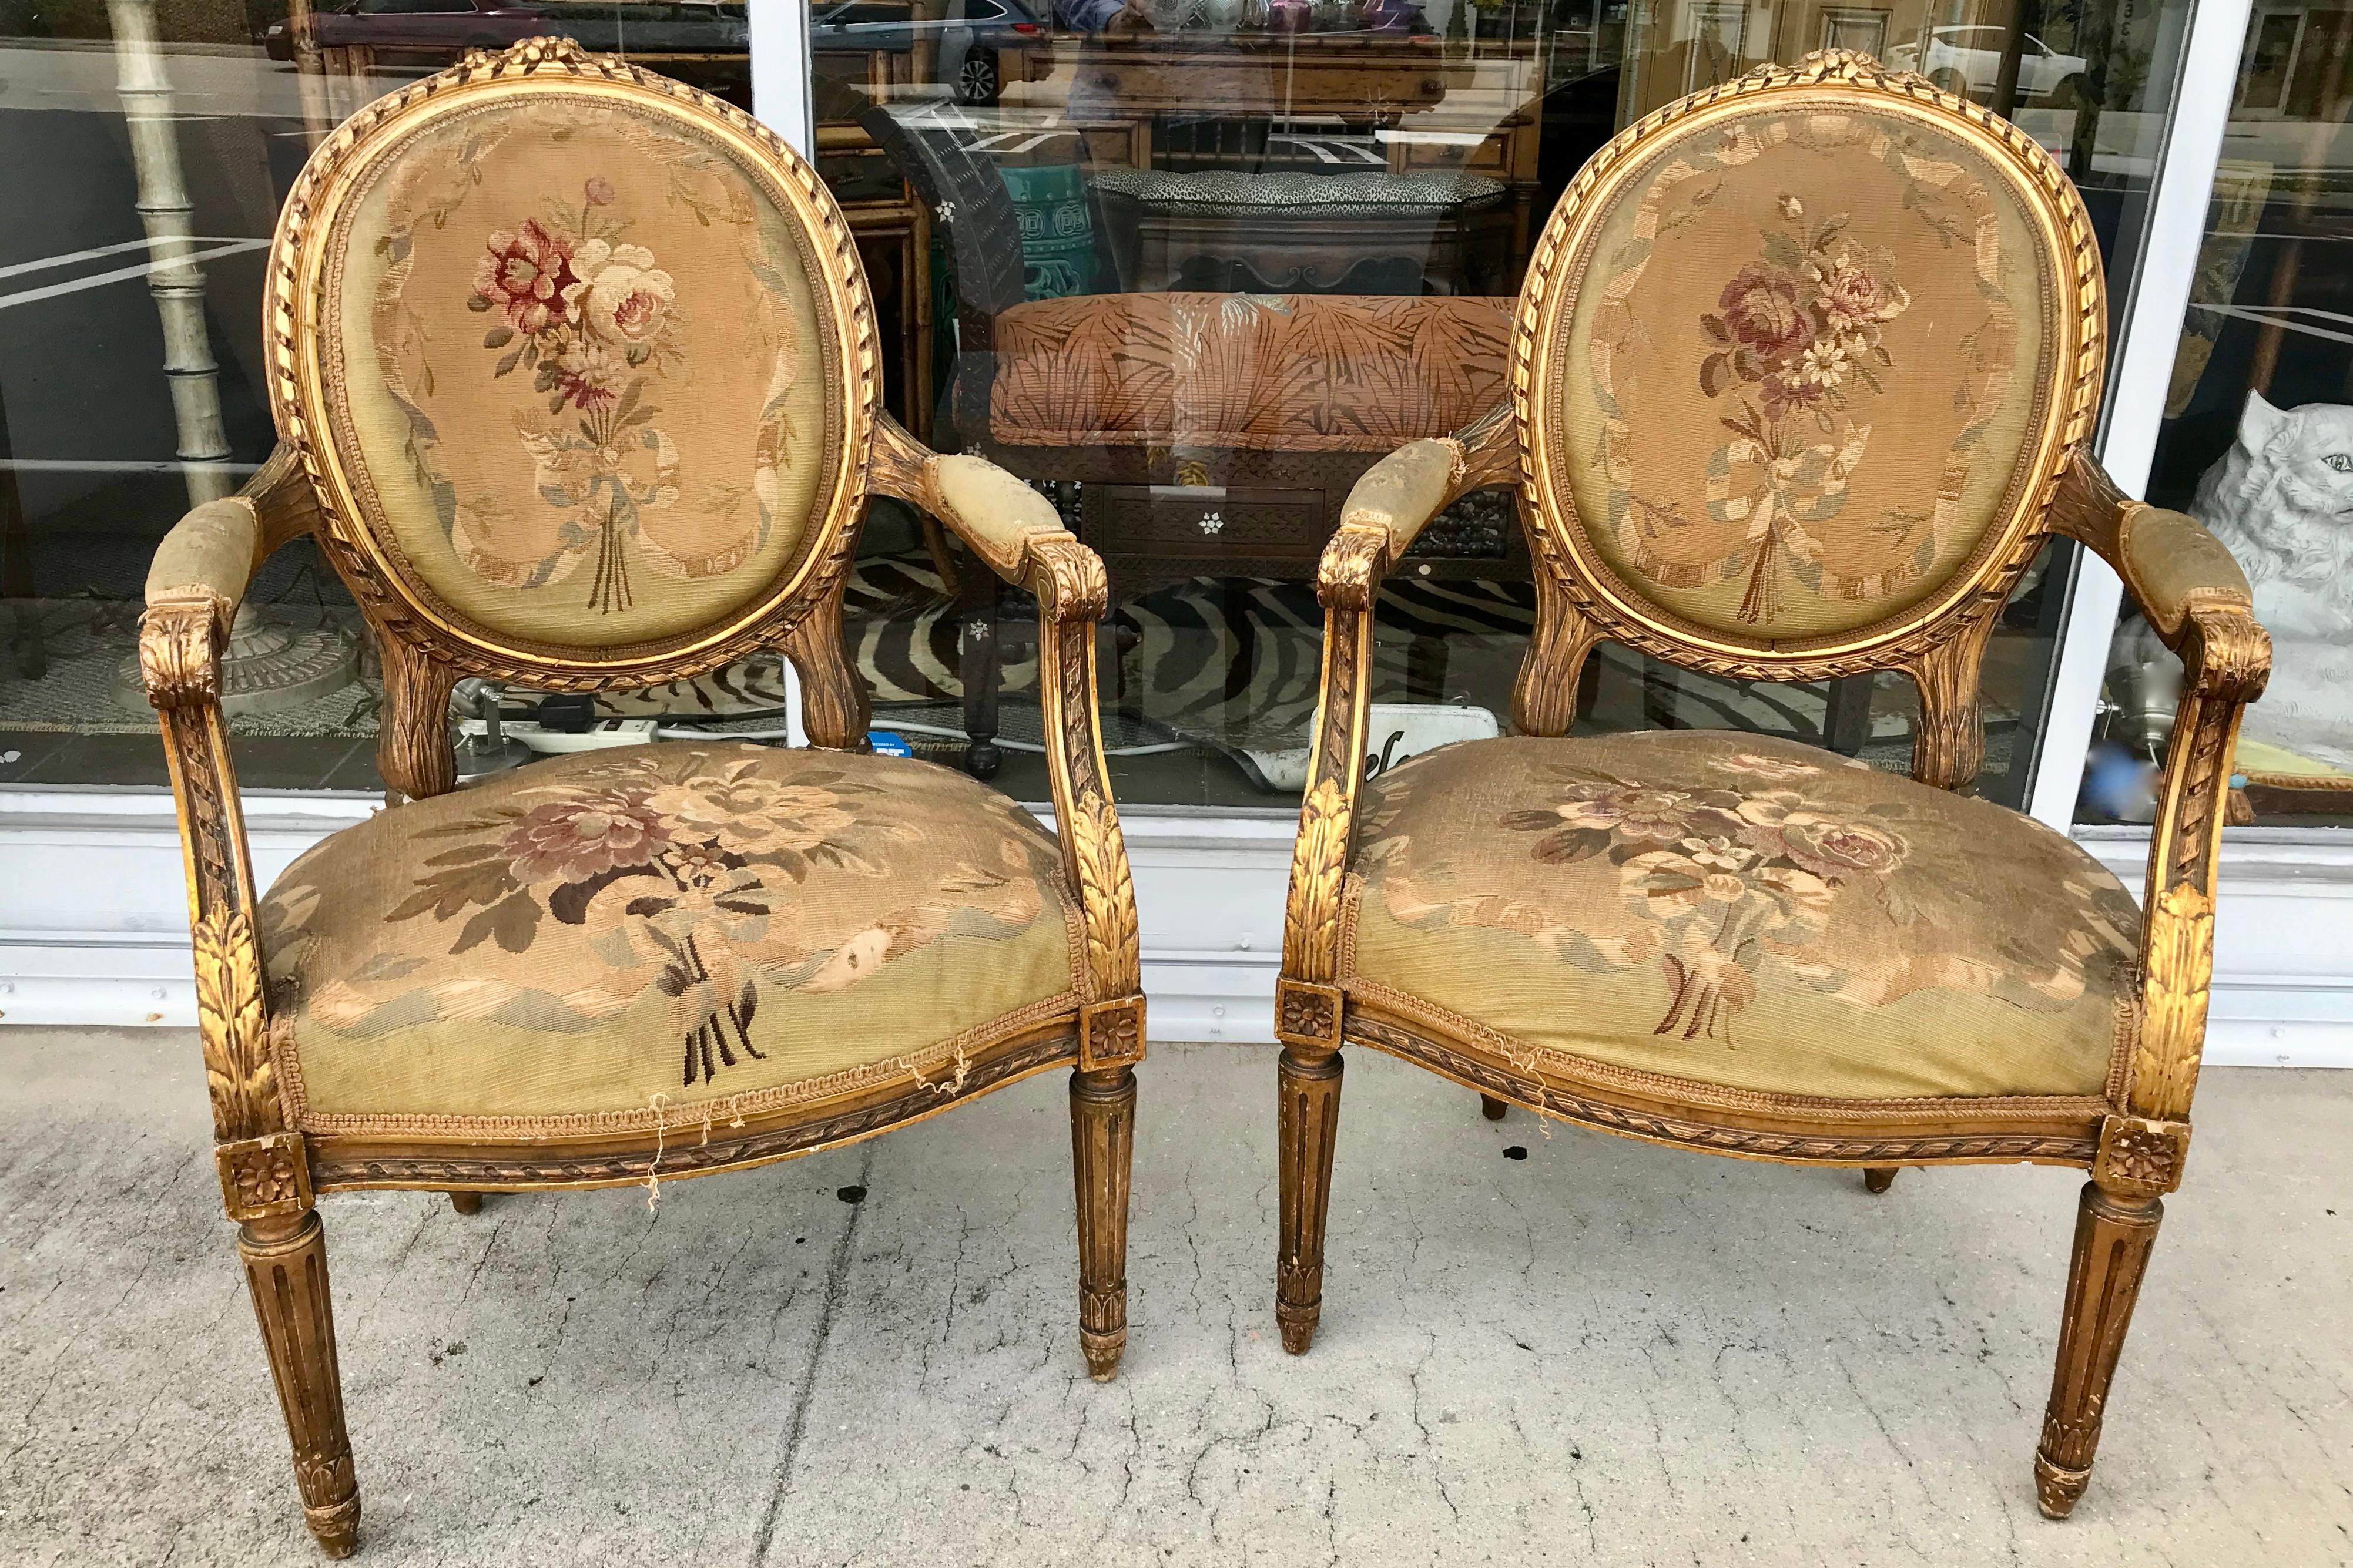 Beautiful quality frames with original old process gilding.
The Aubusson tapestry covers are worn and back upholstery
 is torn Accordingly, they with need to be recovered.
A stylish and authentic pair.